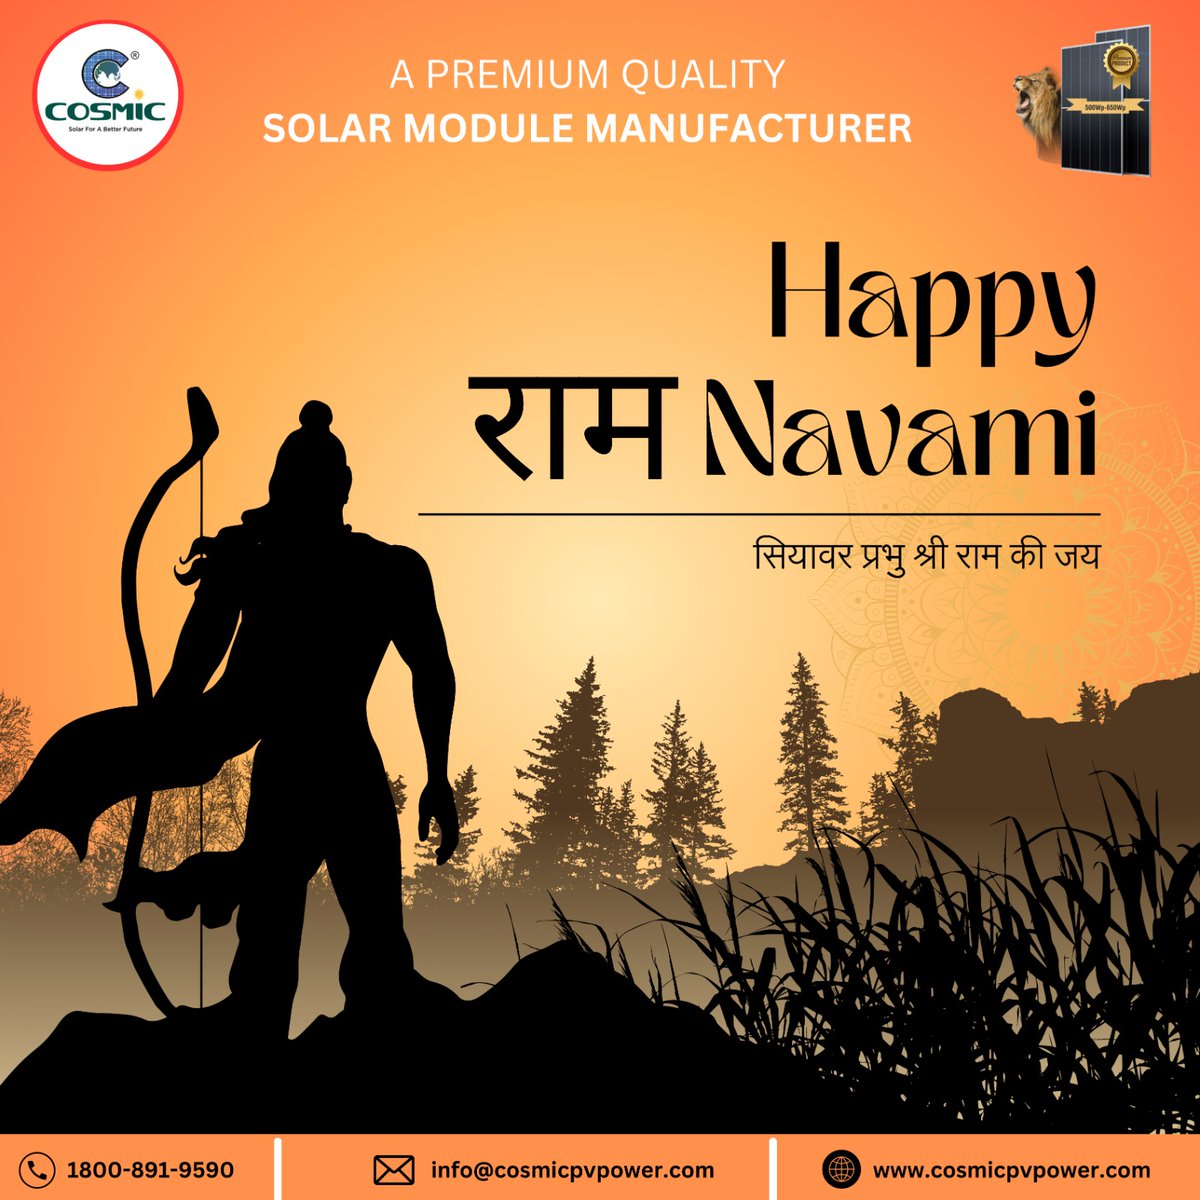 सियावर रामचंद्र की जय!!! On this auspicious day of #RamNavami, let us remember #LordRama's teachings and strive to live a life of compassion, truth, and righteousness. #CosmicPVPower wishes you all a very happy and prosperous Rama Navami! #festival #ramnavami2024 #shriram